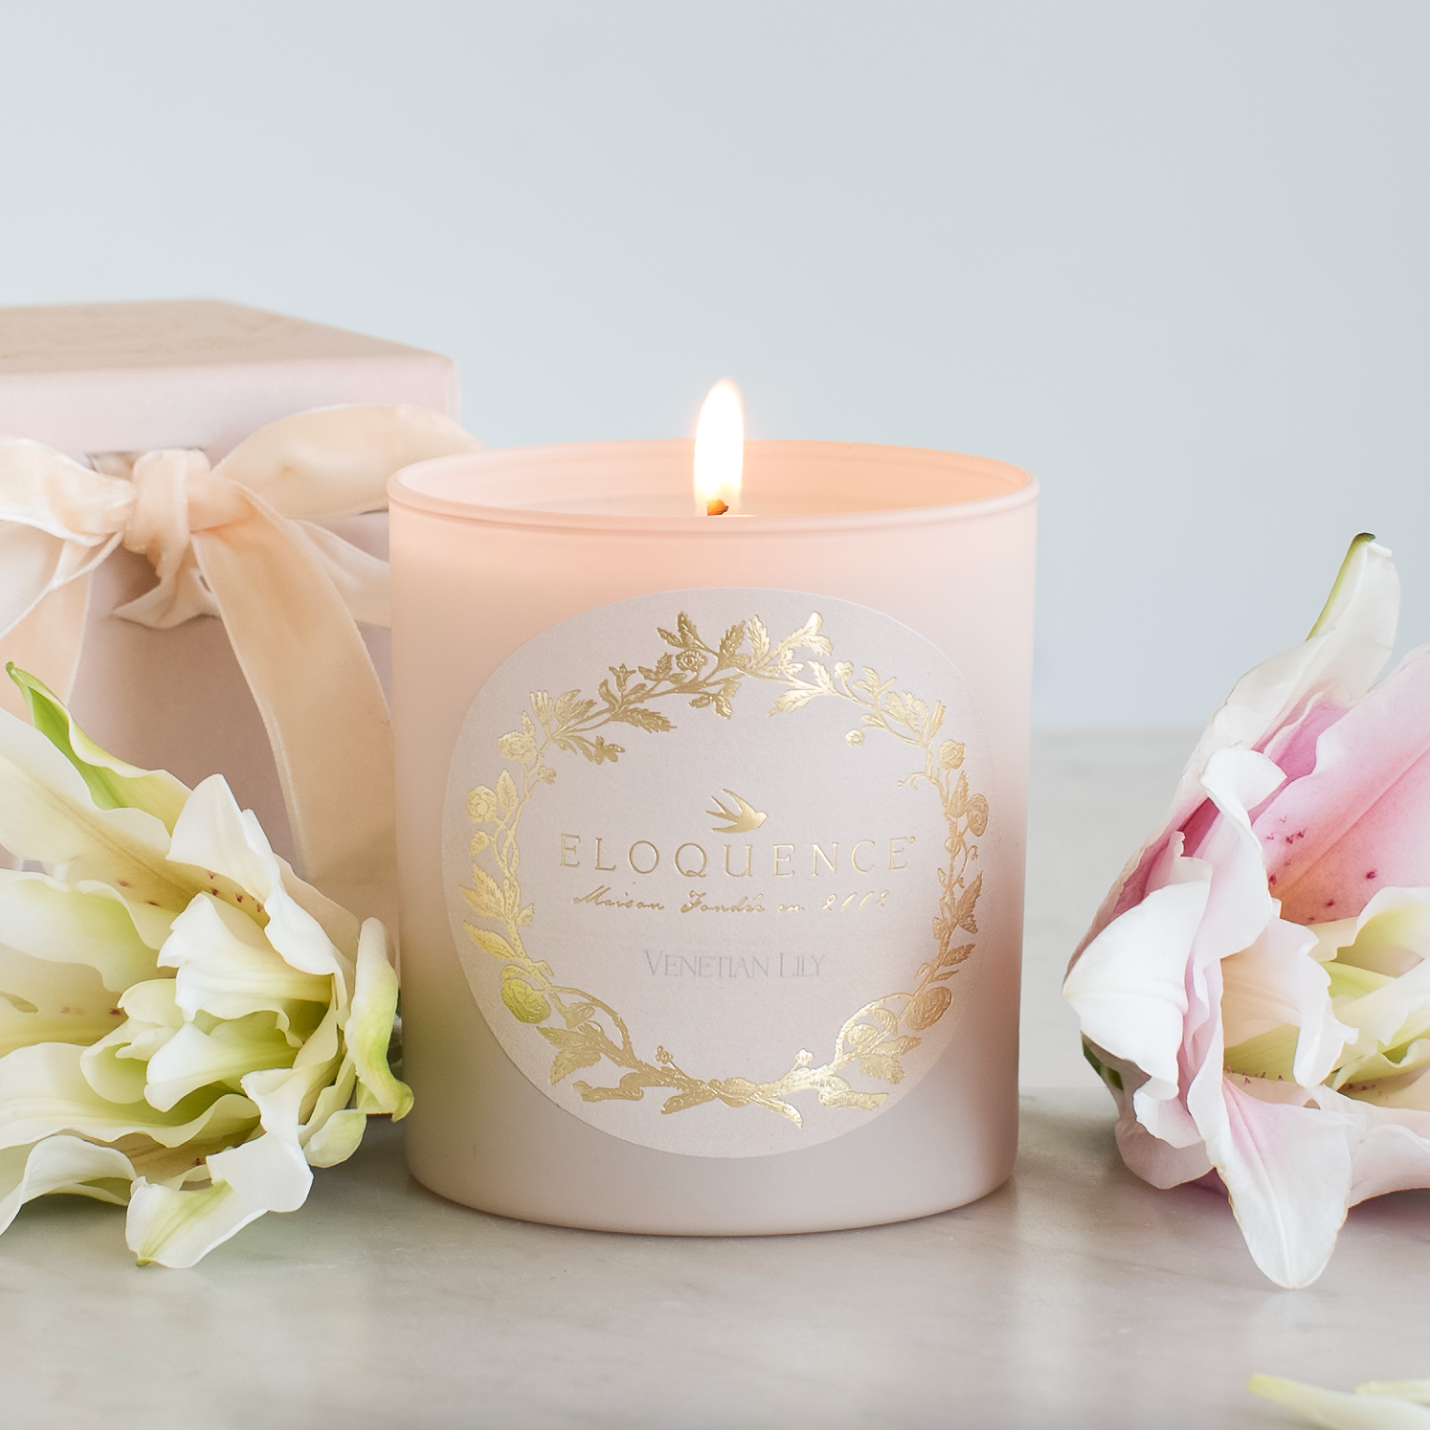 Eloquence Candle Venetian Lily